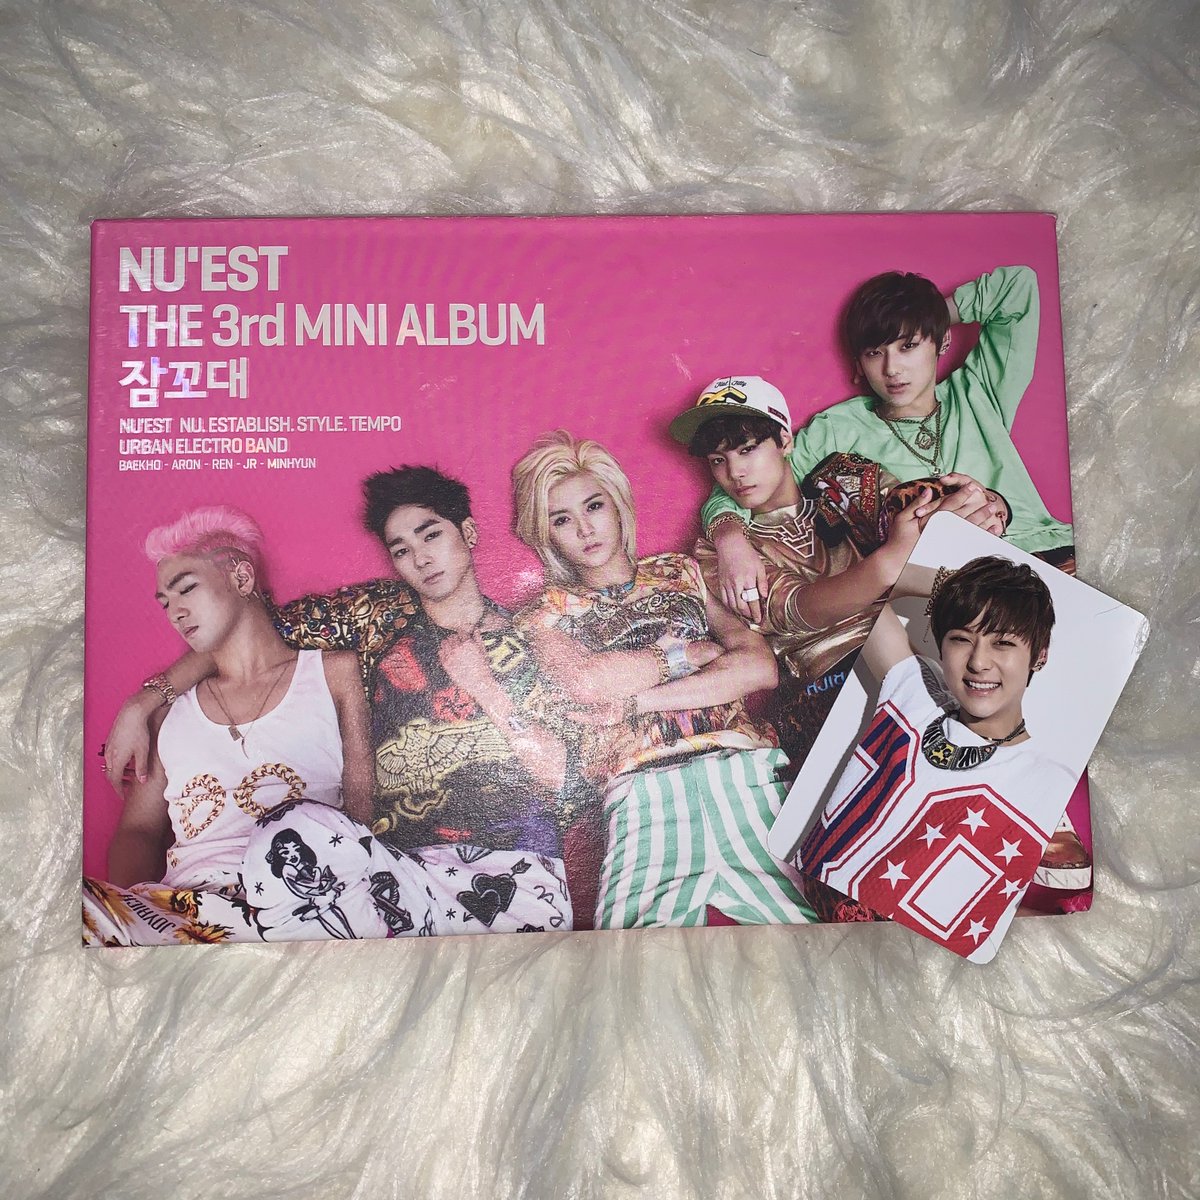 nu'est - action -$10 (Plus Shipping)nu'est - hello-$10 (Plus Shipping)nu'est - sleep talking-$10 (Plus Shipping)nu'est - q is-$10 (Plus Shipping)(yes, every photo card is minhyun so if you're a minhyun fan, i'll bundle all four of these together for $30 if you want!)